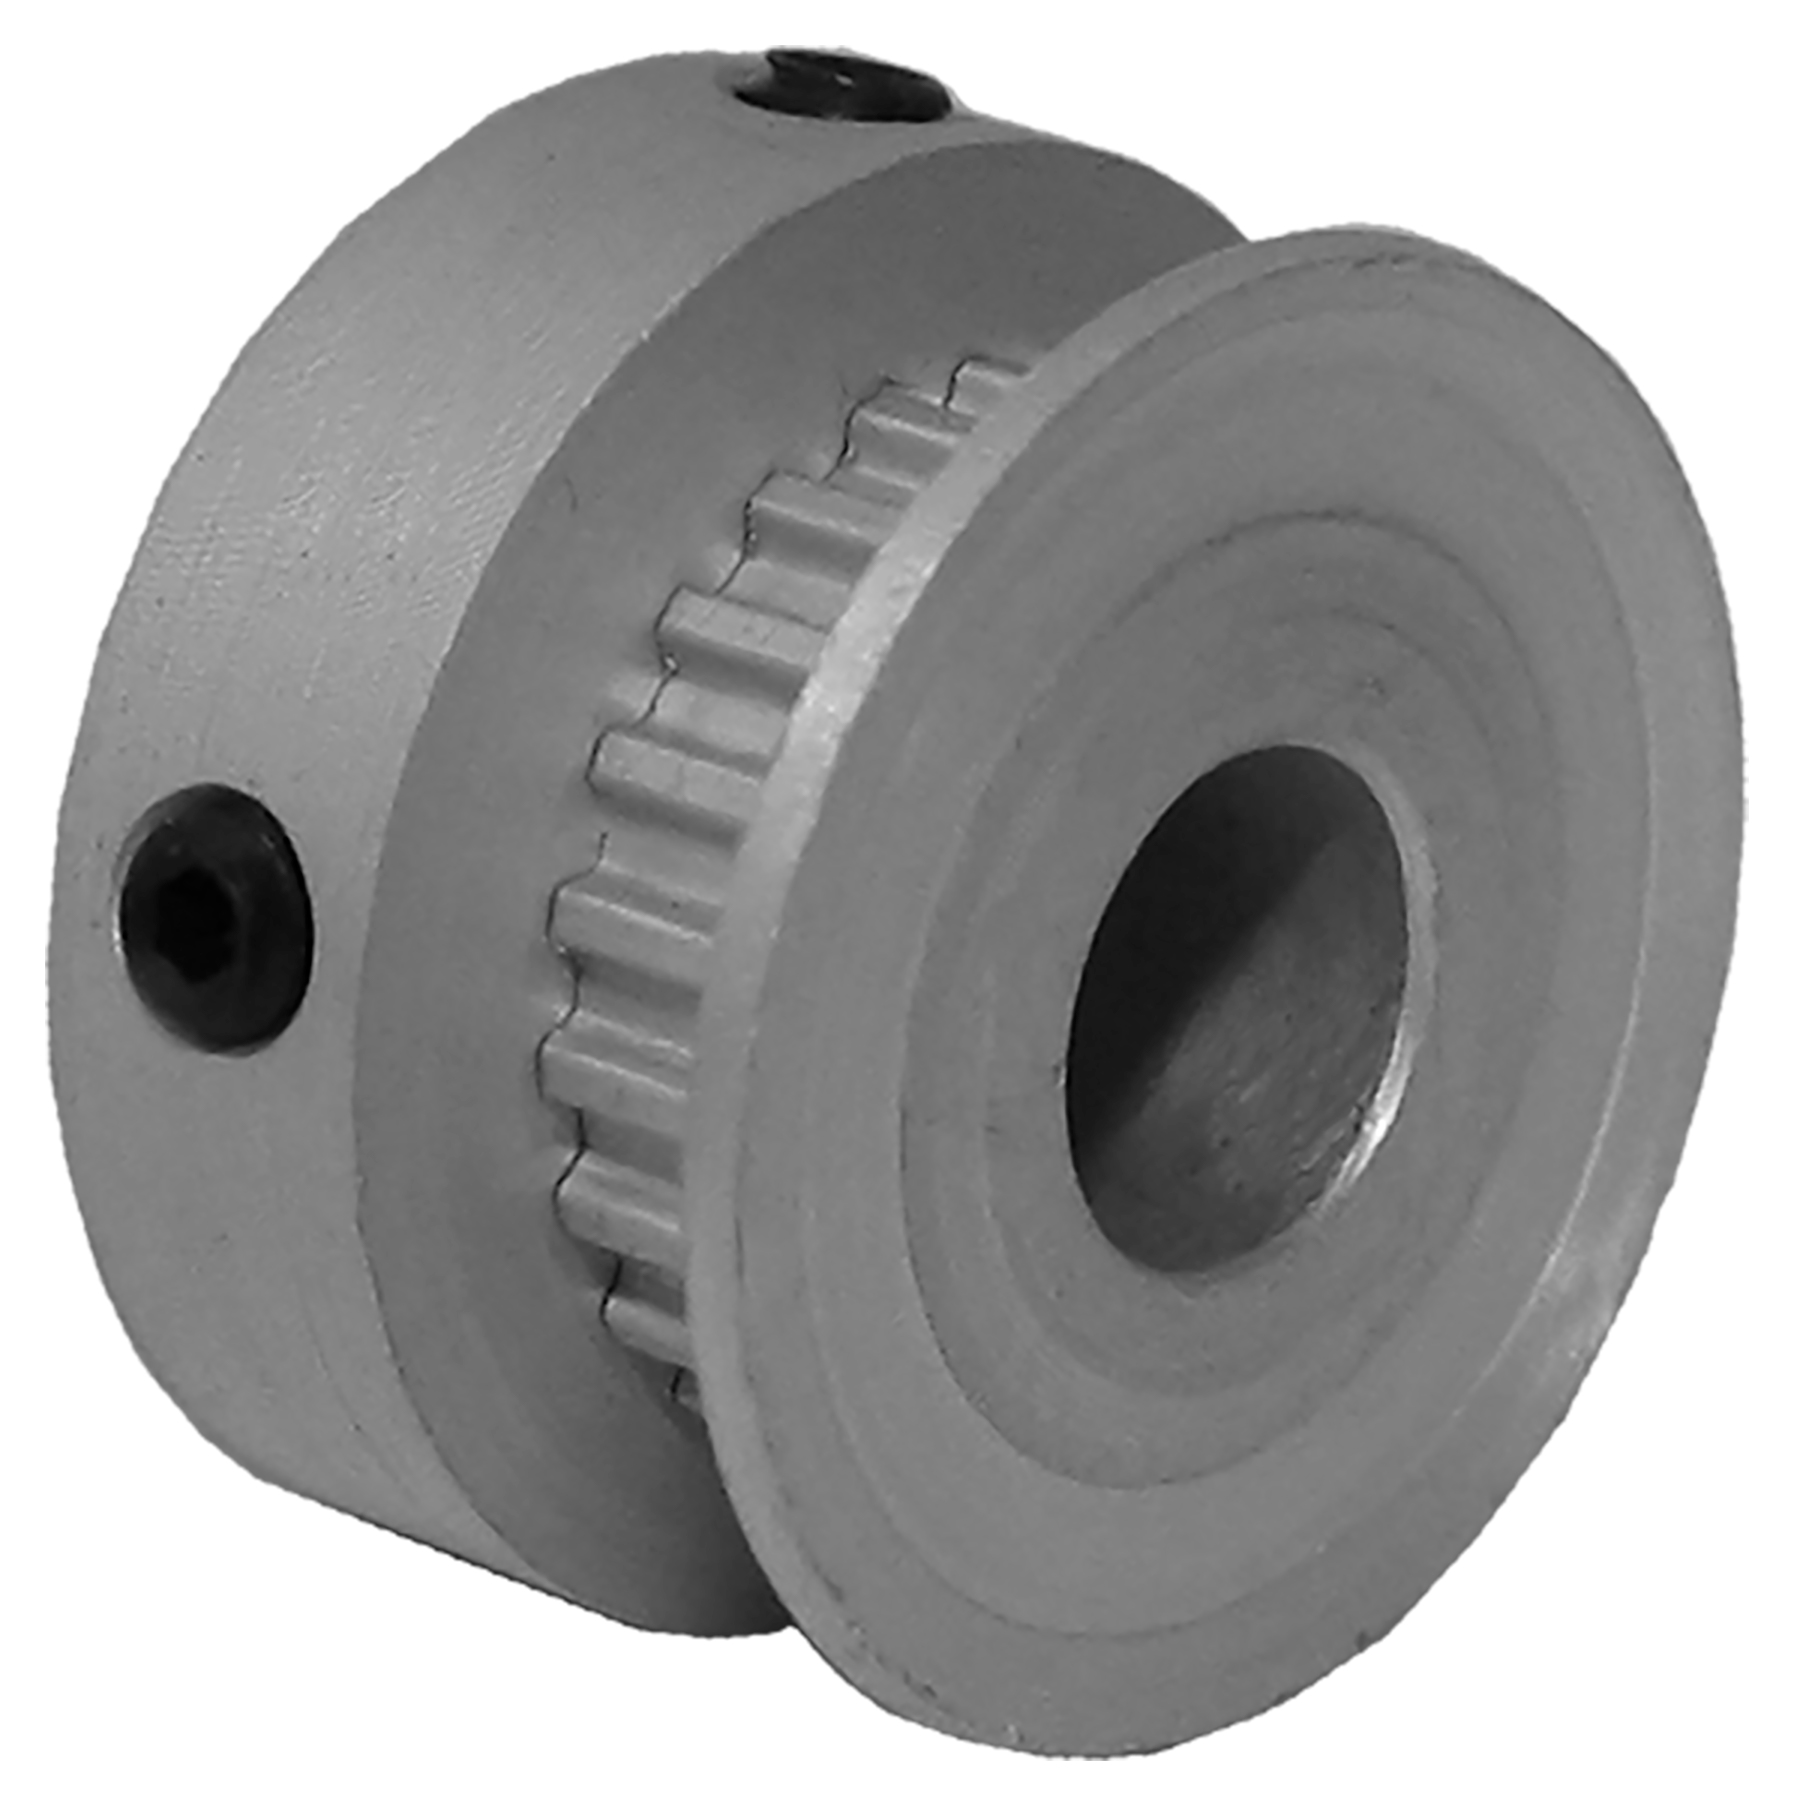 22MP012-6CA3 - Aluminum Imperial Pitch Pulleys